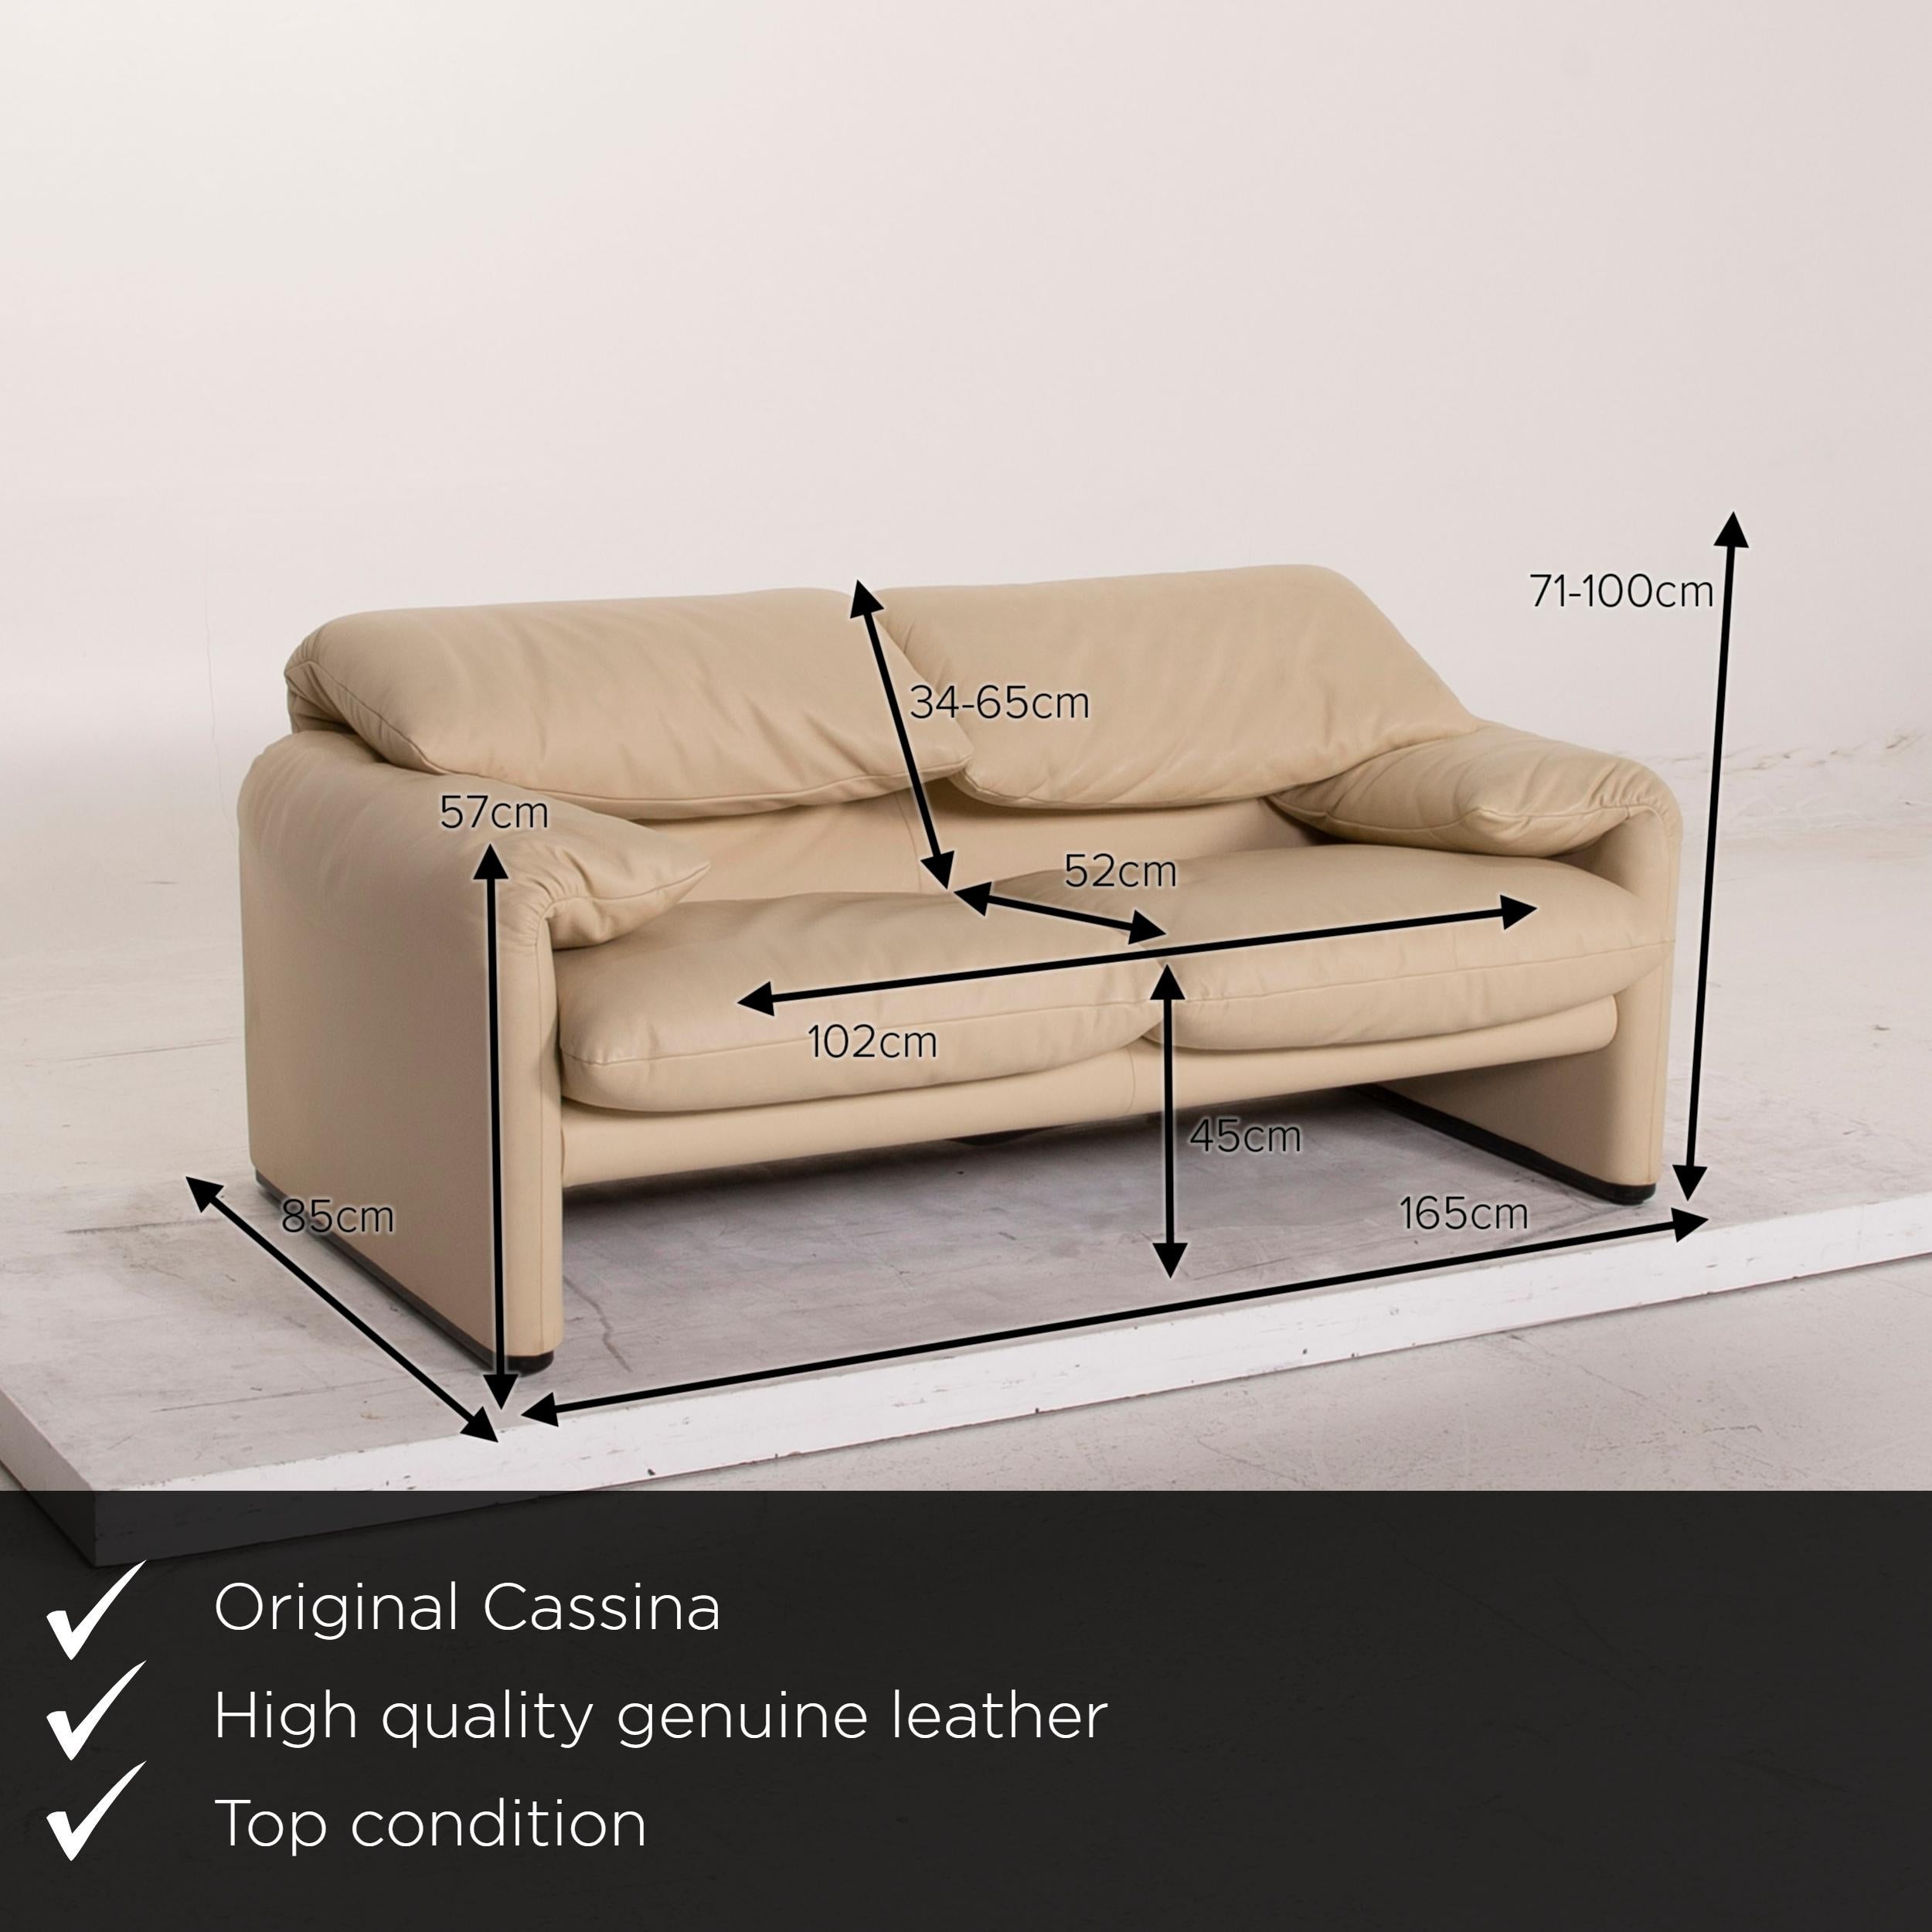 We present to you a Cassina Maralunga leather sofa cream two-seat.


 Product measurements in centimeters:
 

Depth 85
Width 165
Height 71
Seat height 45
Rest height 57
Seat depth 52
Seat width 102
Back height 34.

  